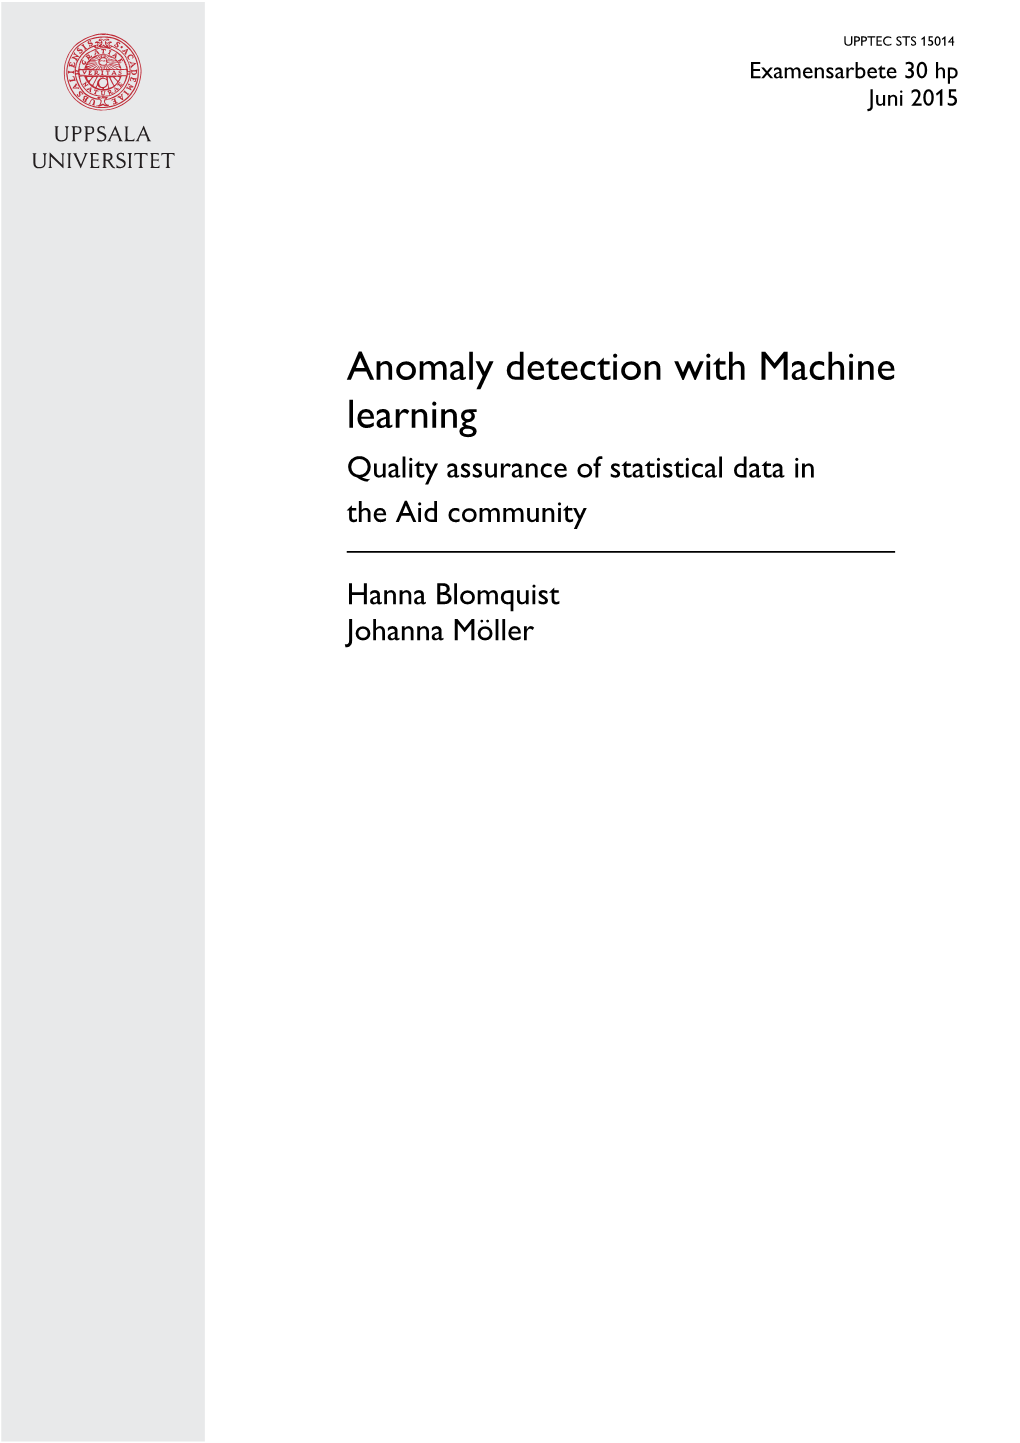 Anomaly Detection with Machine Learning Quality Assurance of Statistical Data in the Aid Community